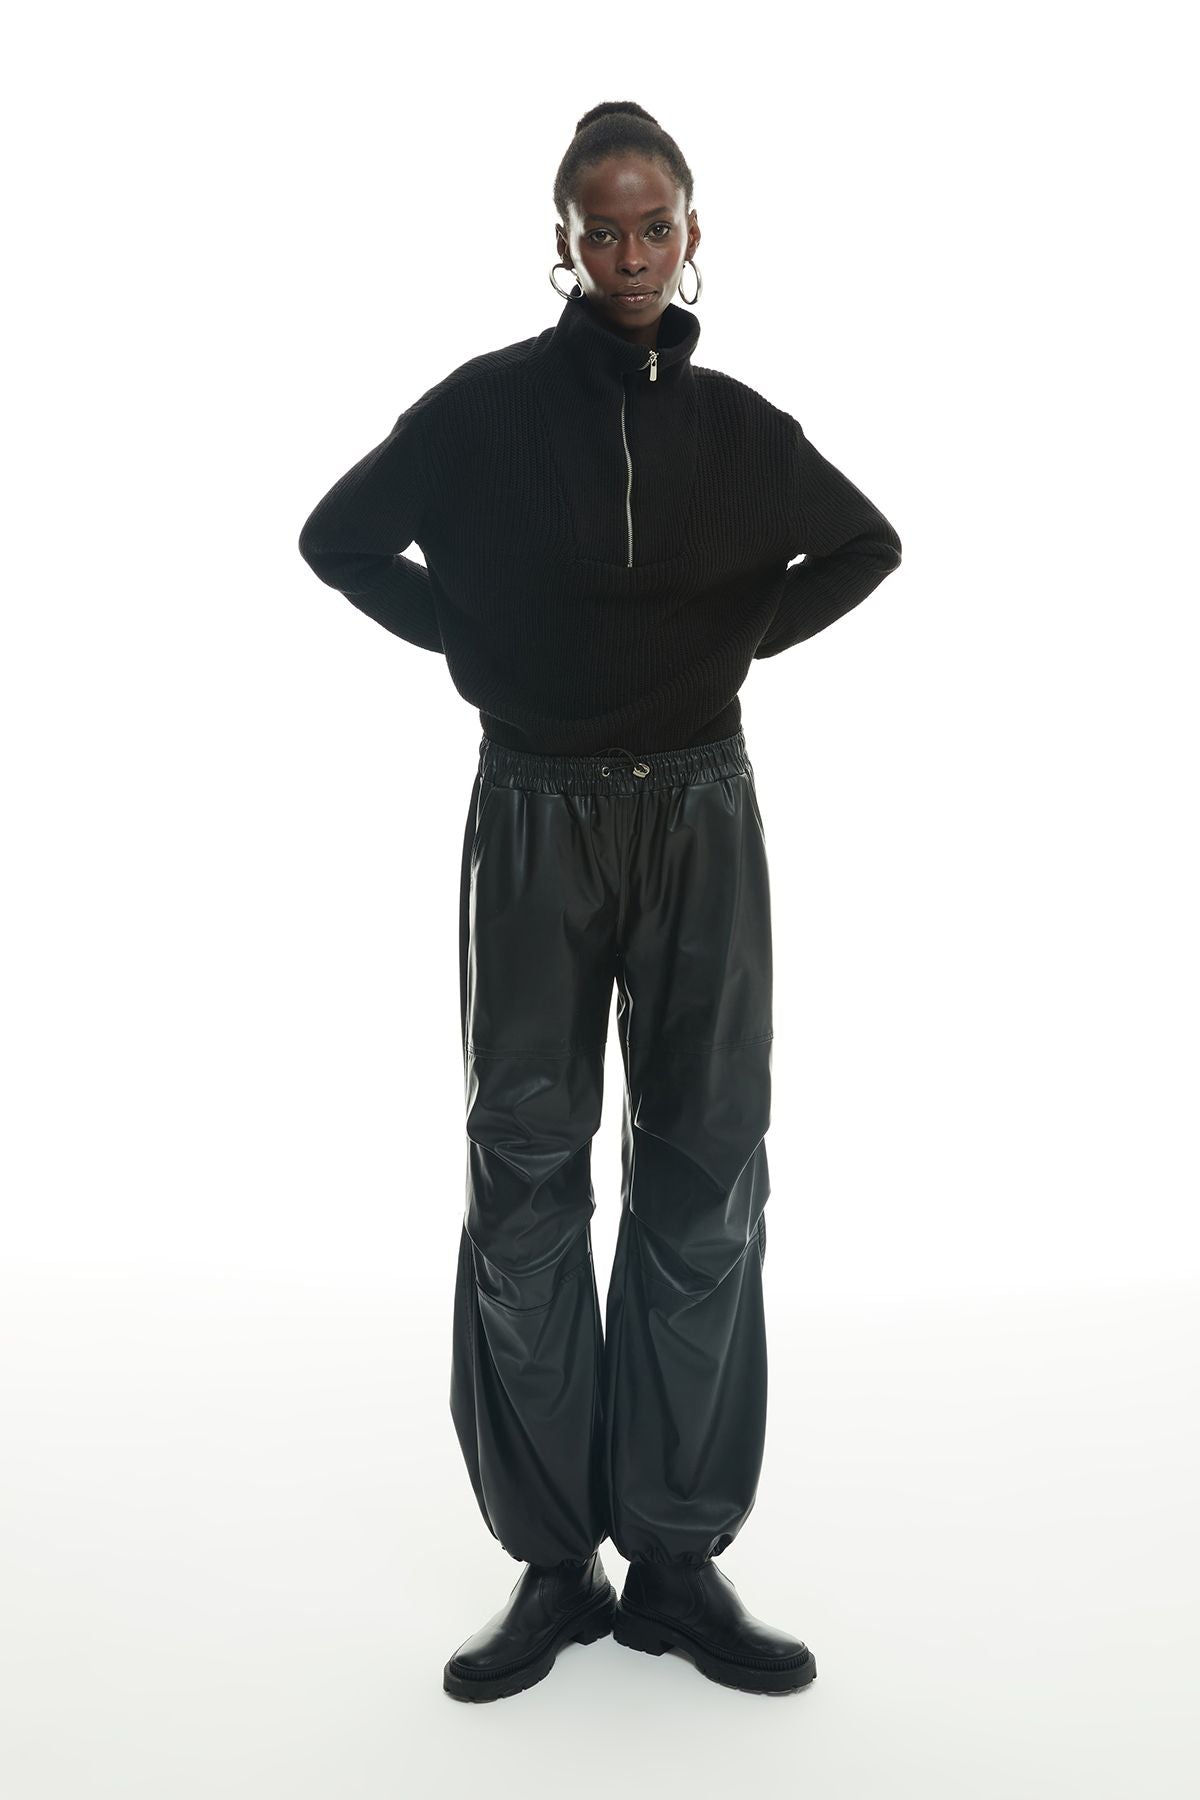 Leather Parachute Trousers With Elastic Legs Black